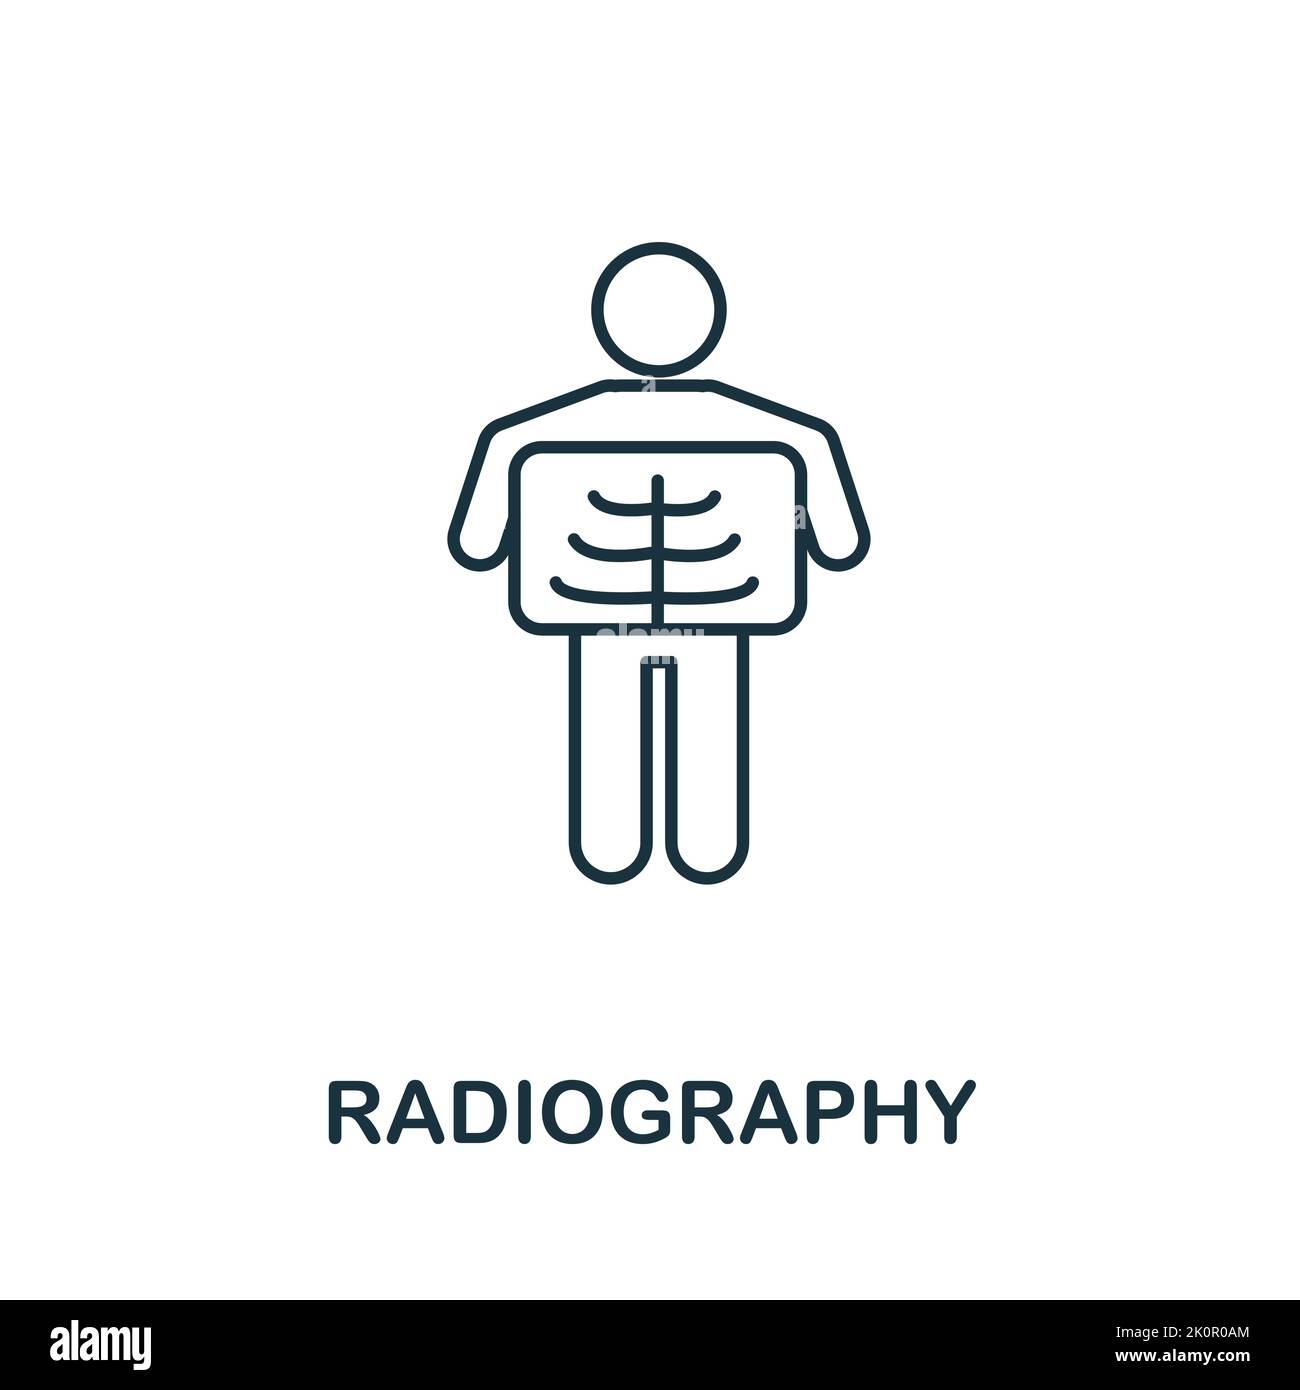 Radiography icon. Monocrome element from medical services collection. Radiography icon for banners, infographics and templates. Stock Vector